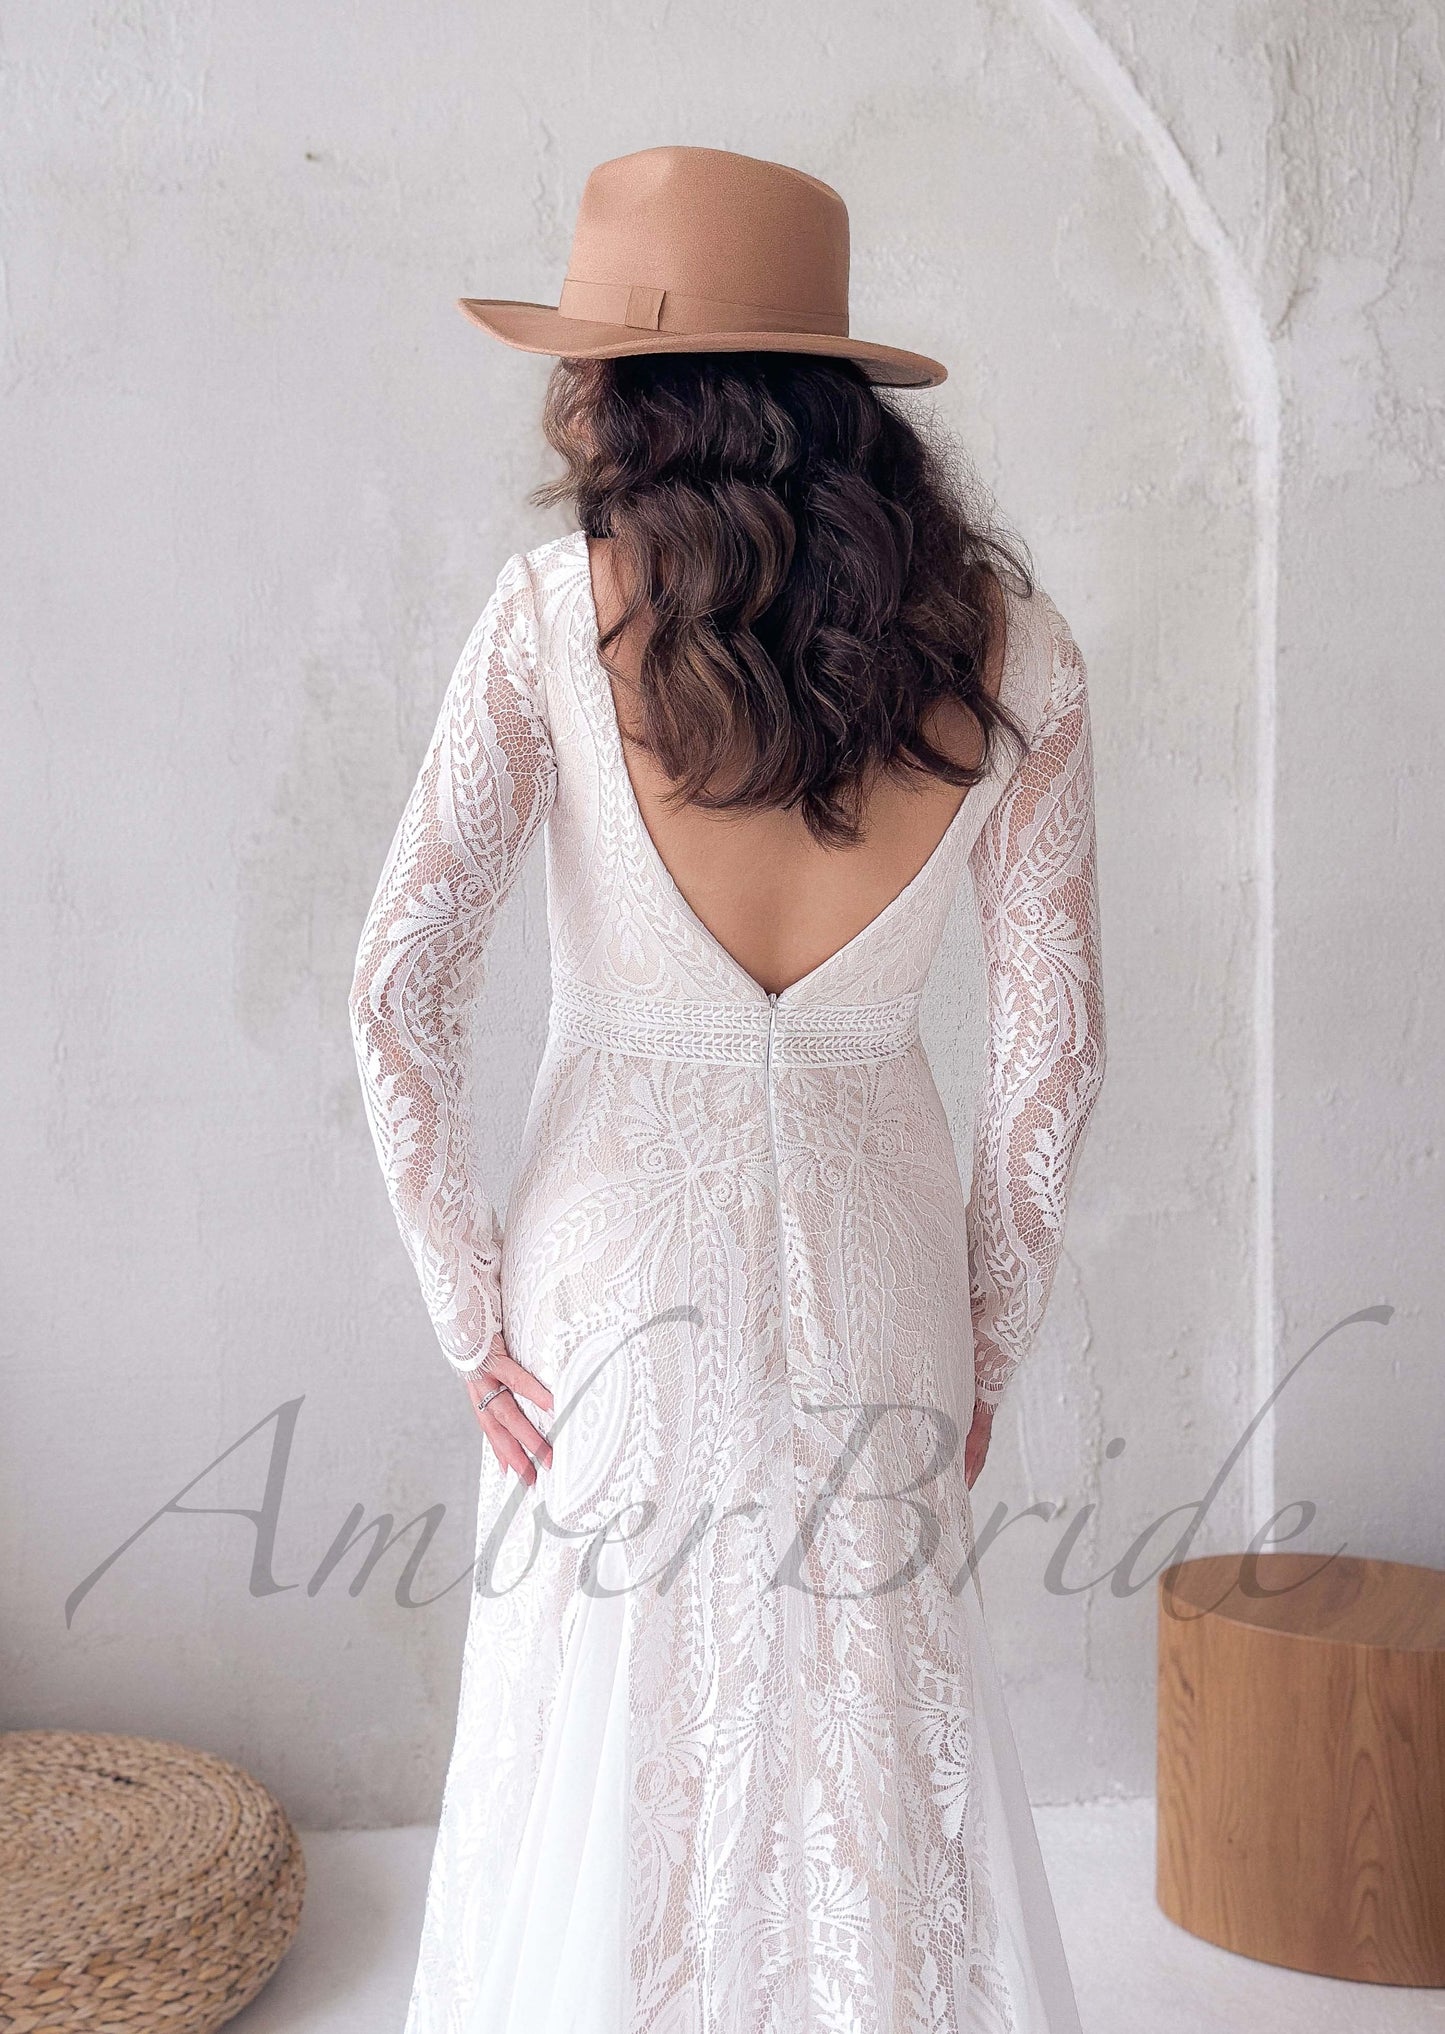 Boho A Line Lace Wedding Dress with Long Sleeve and Backless Design